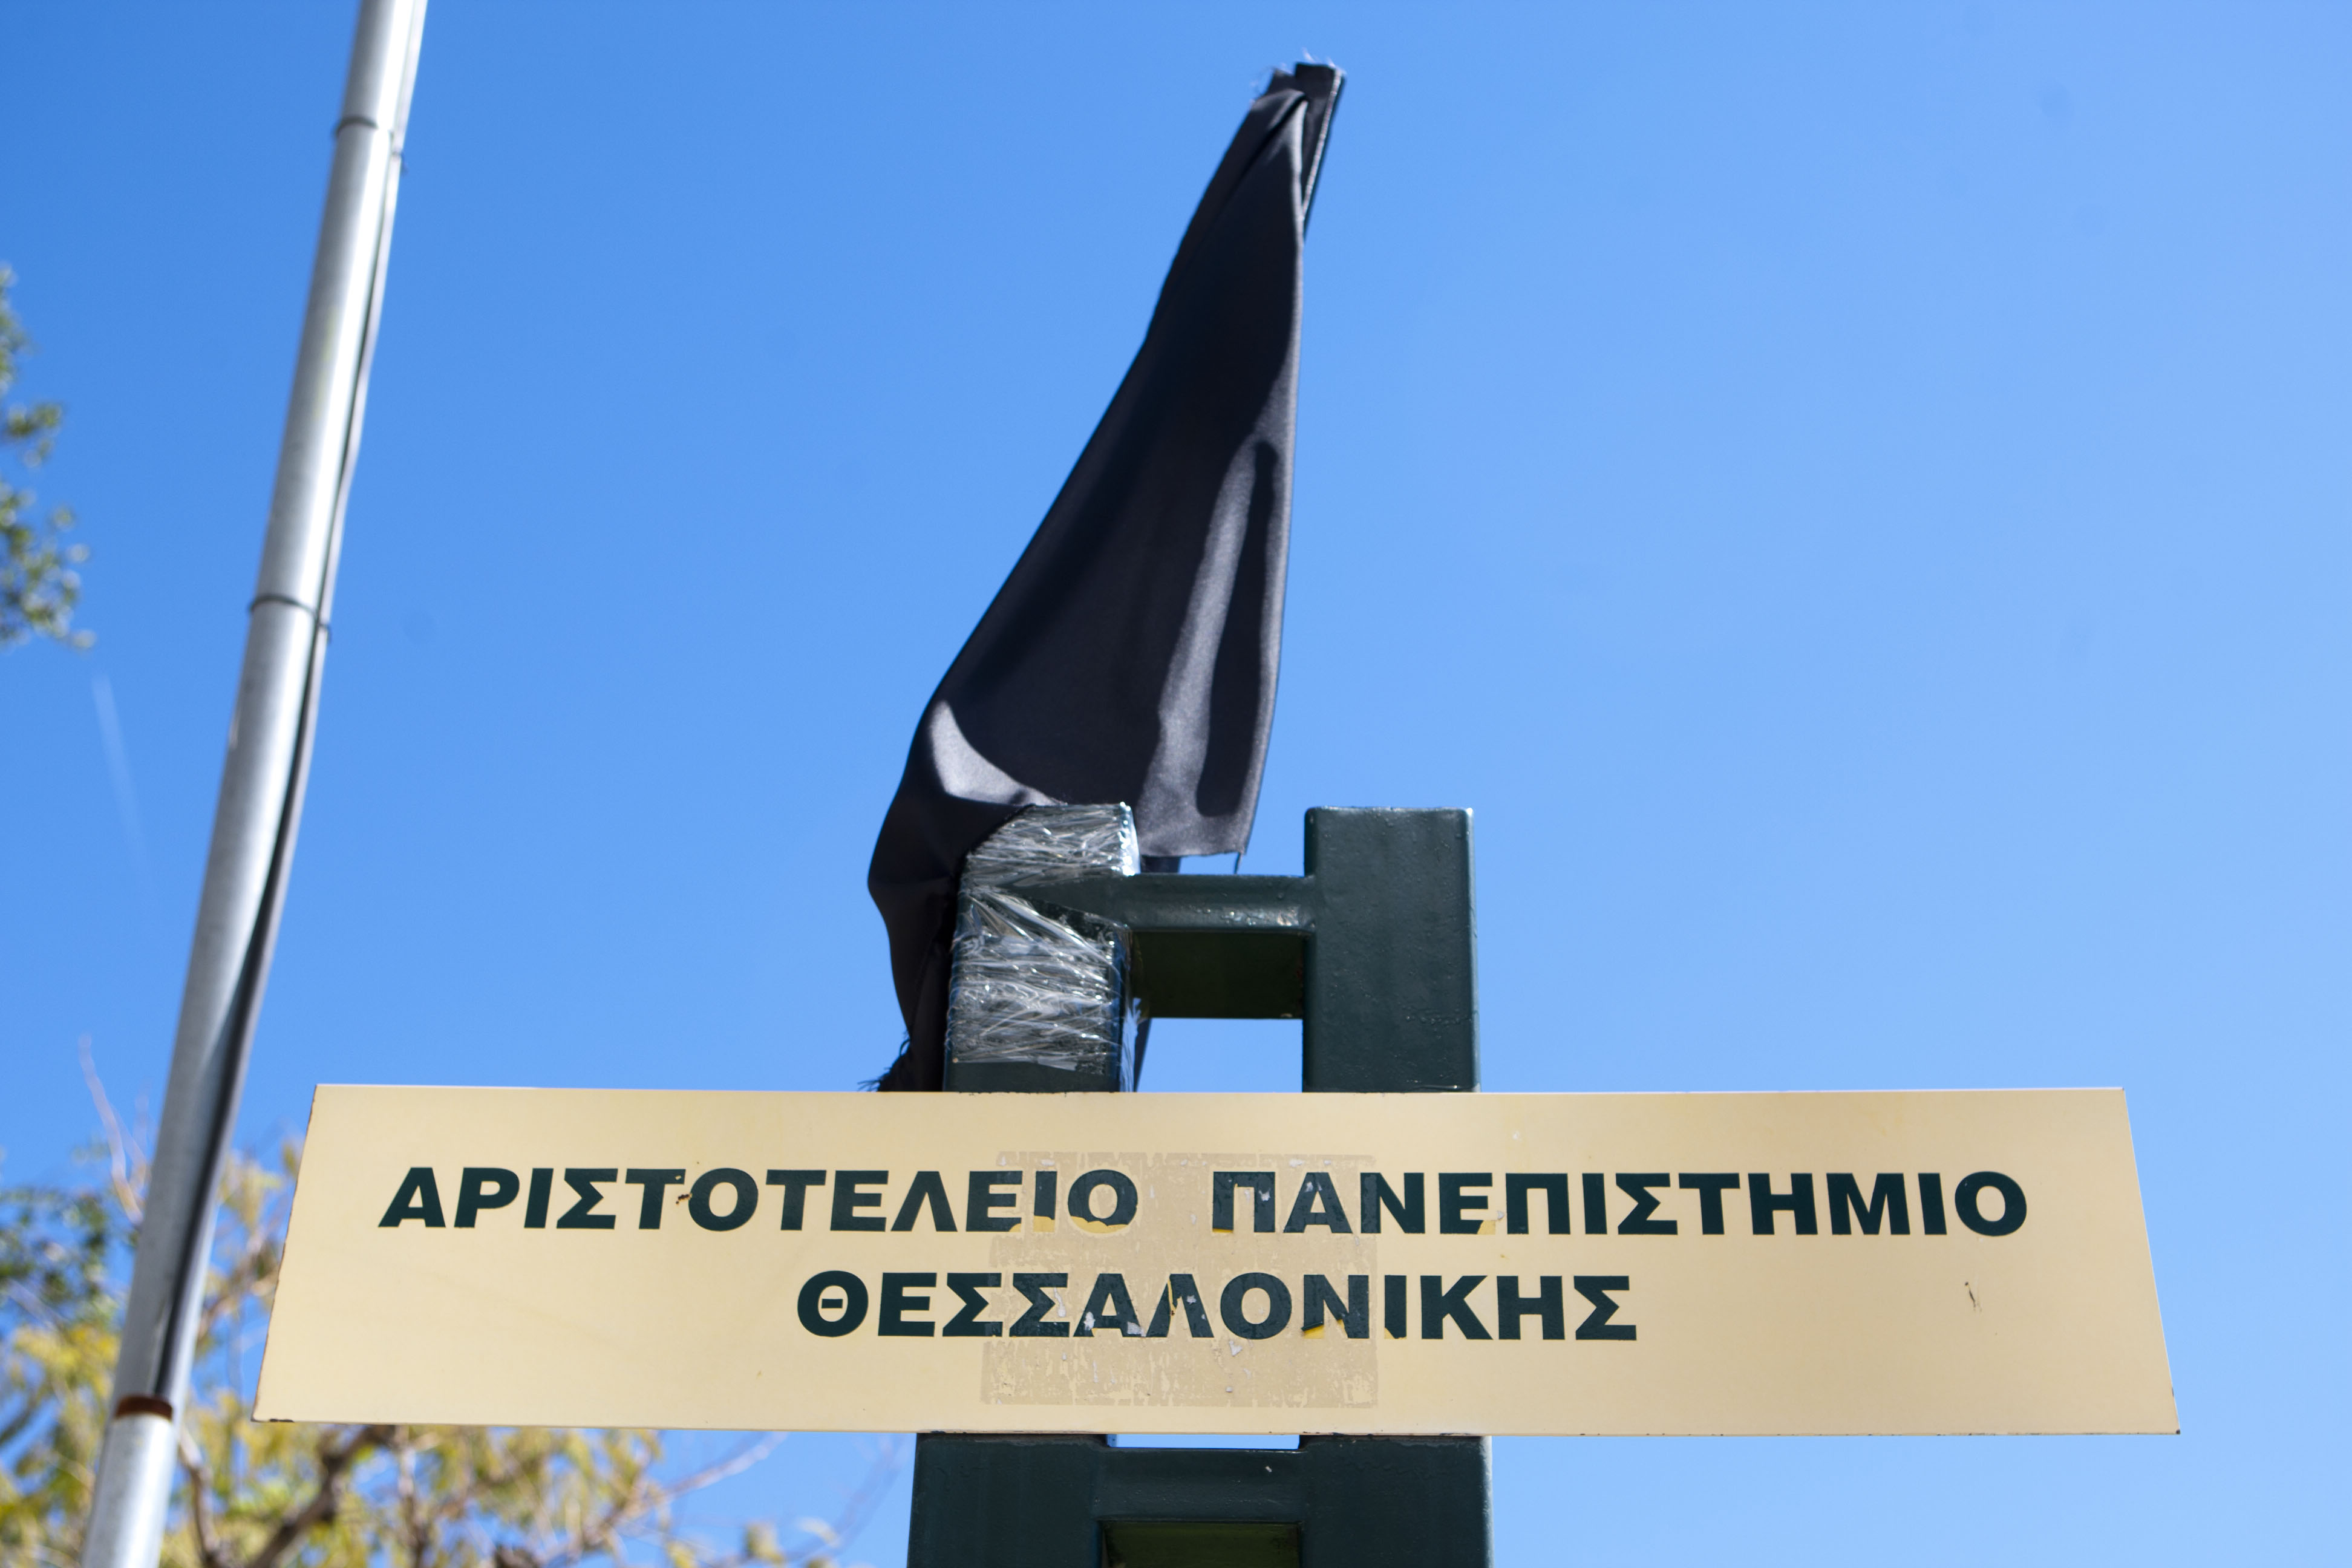 Holocaust memorial unveiled at University of Thessaloniki